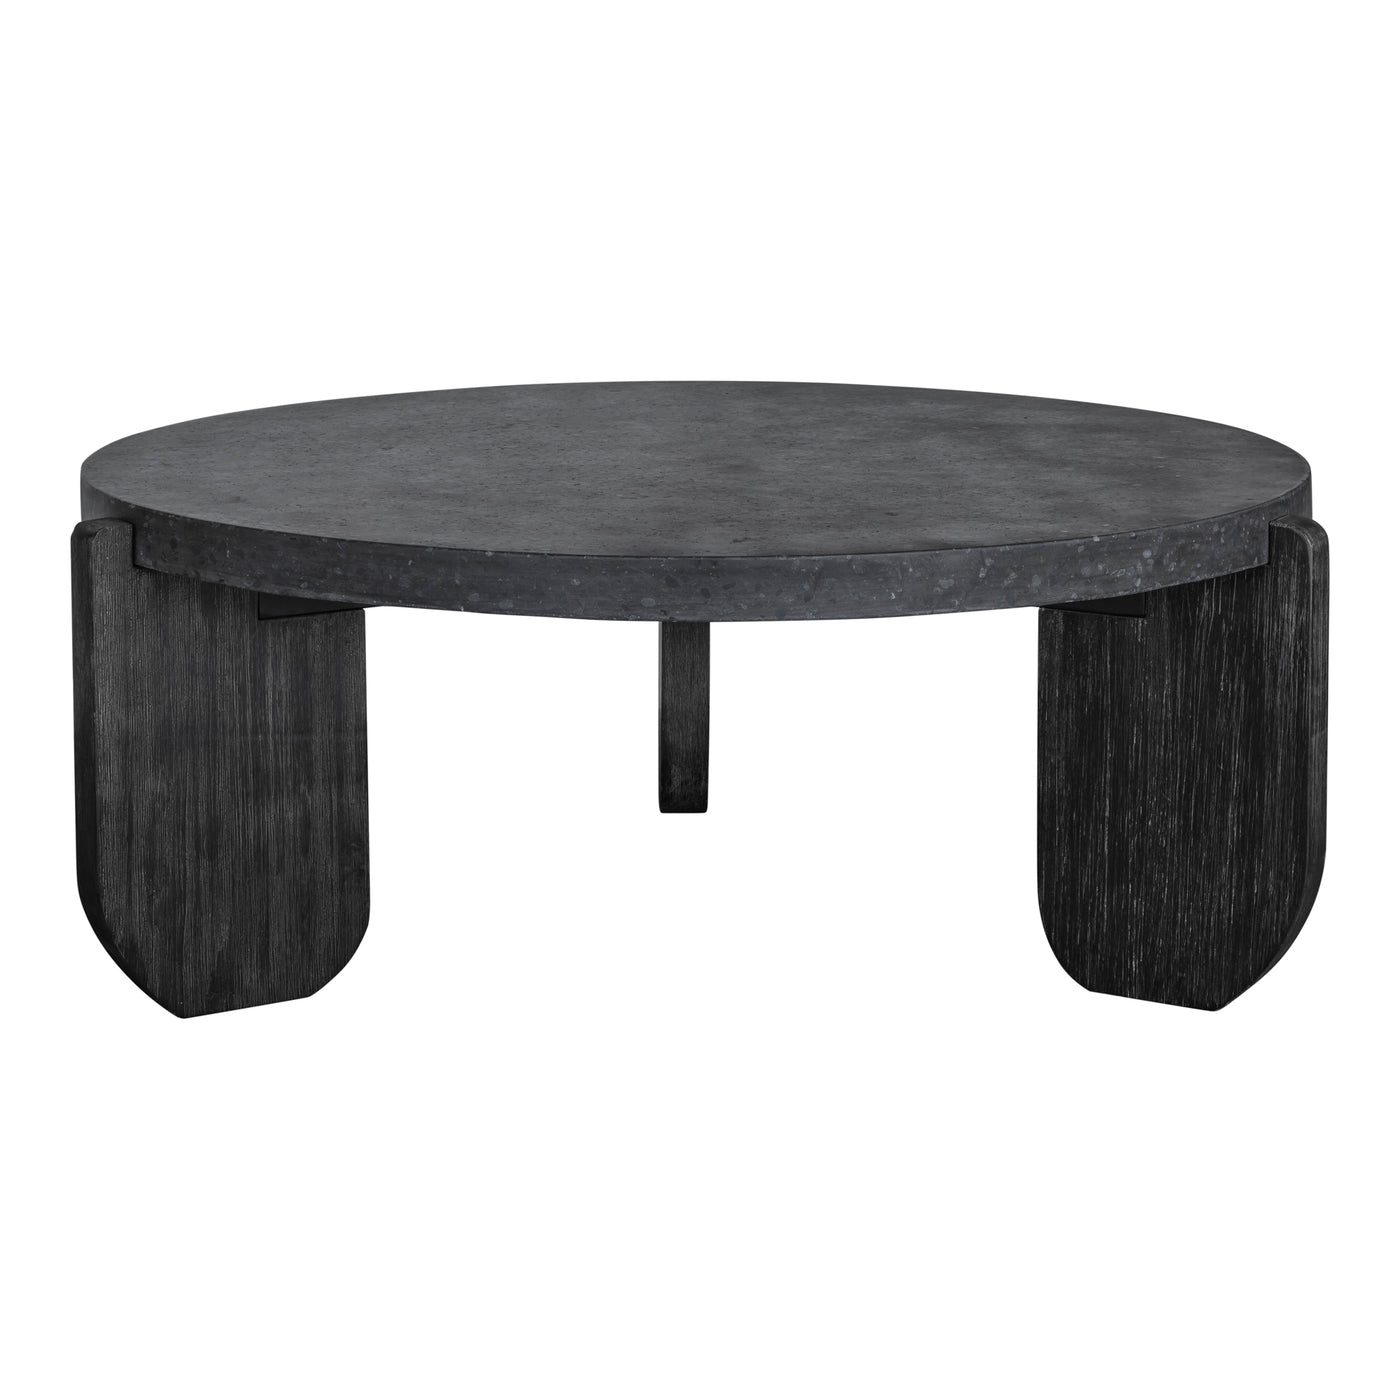 Ancient inspiration meets design innovation. Strikingly dark, the Wunder coffee table takes a monolithic statement into a ...